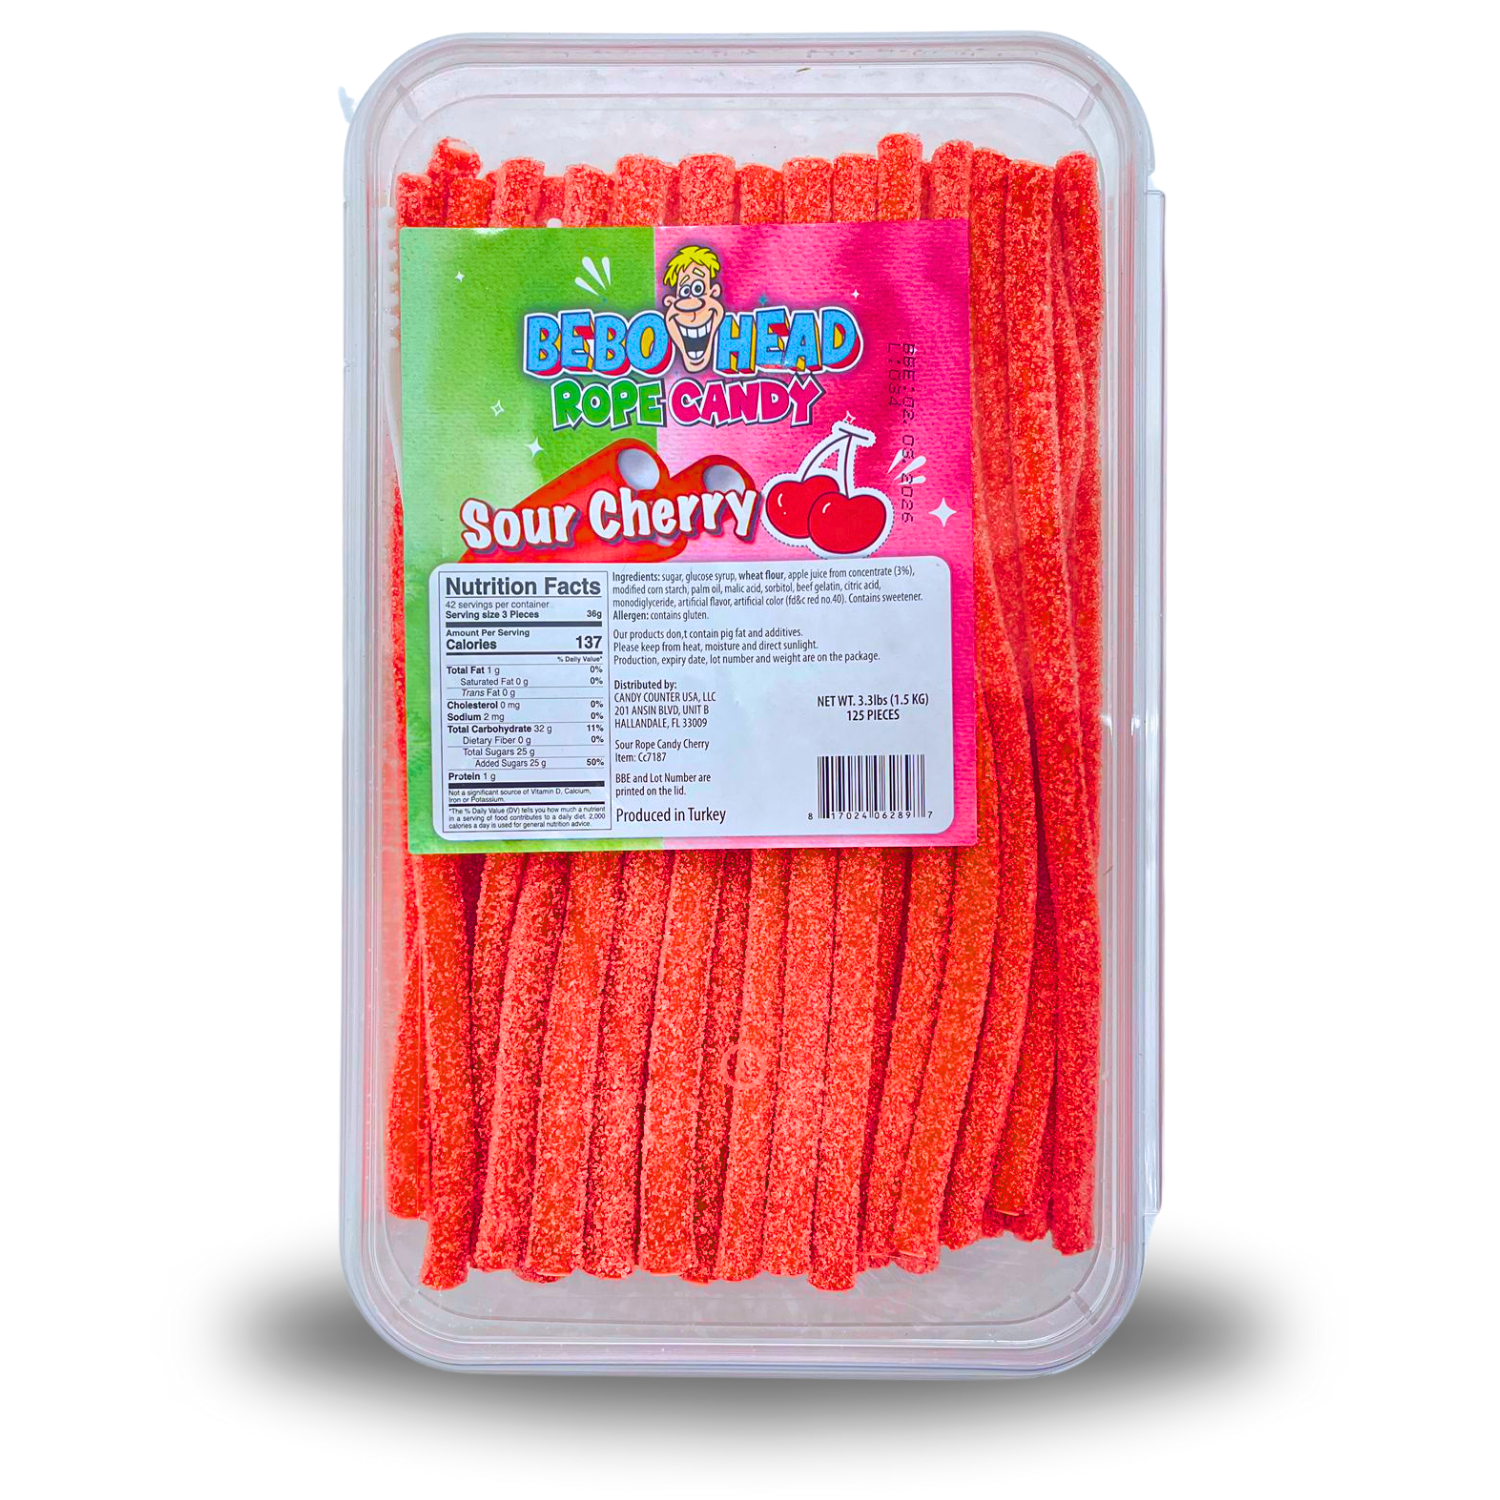 Cherry Sour Ropes - 3.3 Pounds